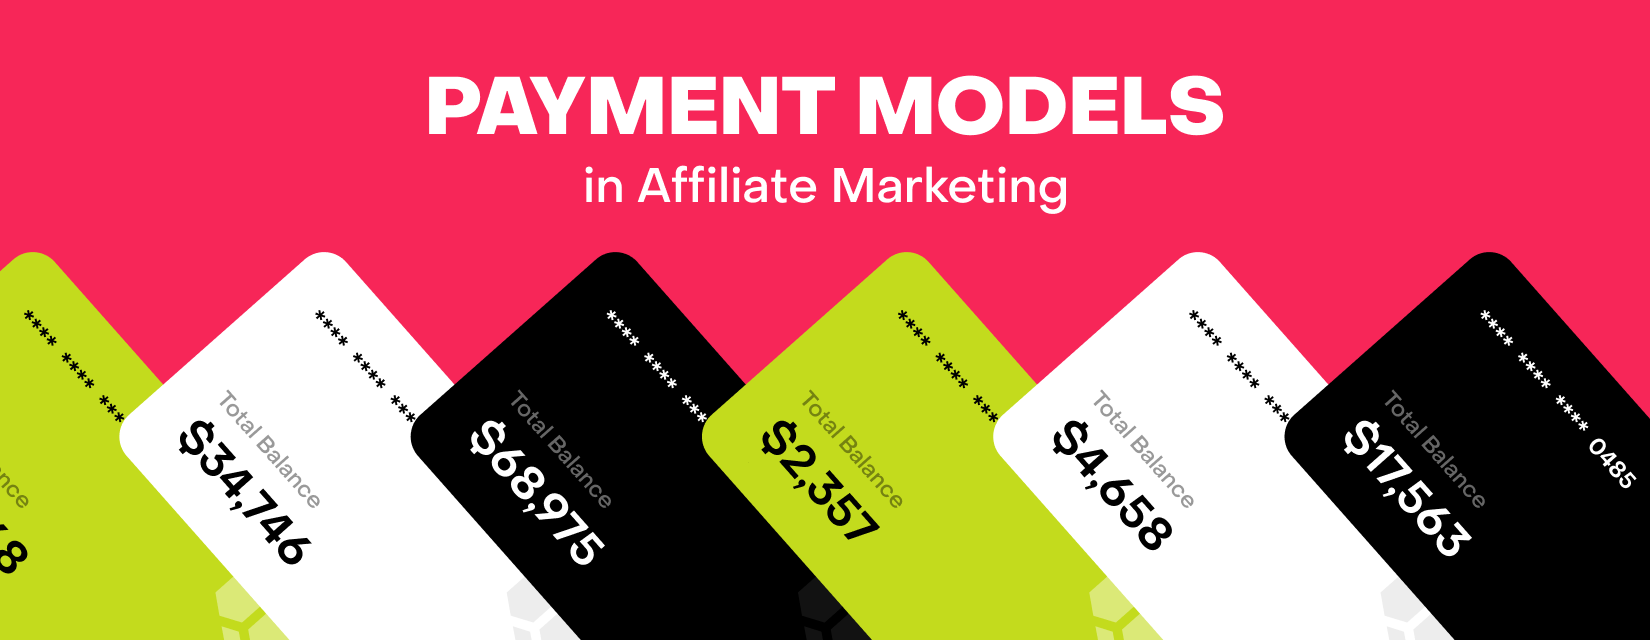 Payment Models in Affiliate Marketing